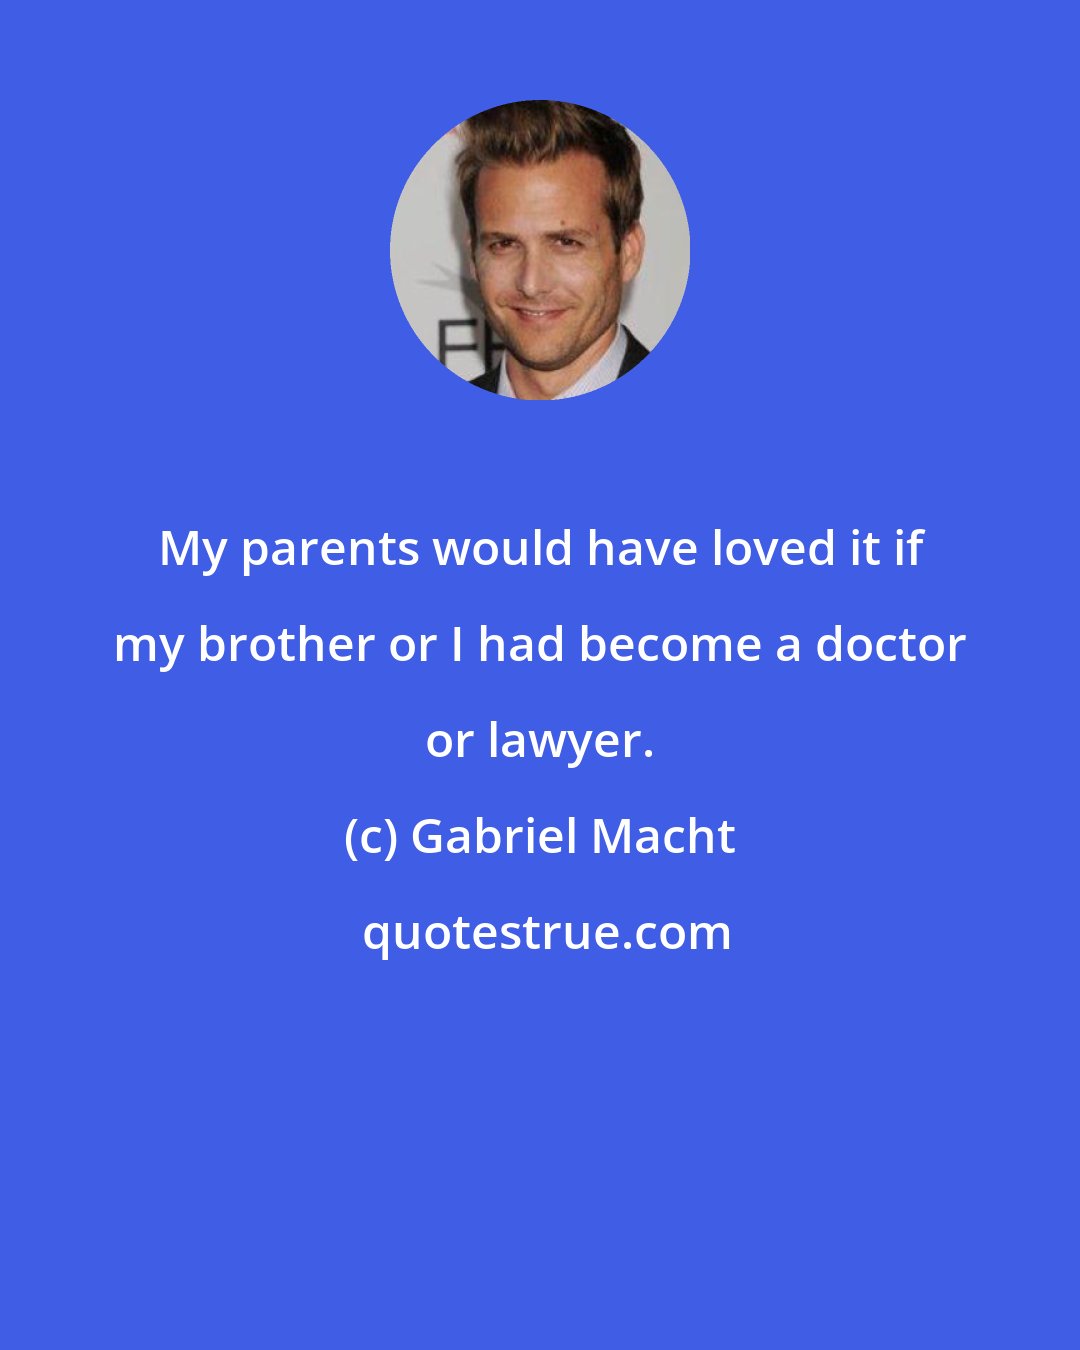 Gabriel Macht: My parents would have loved it if my brother or I had become a doctor or lawyer.